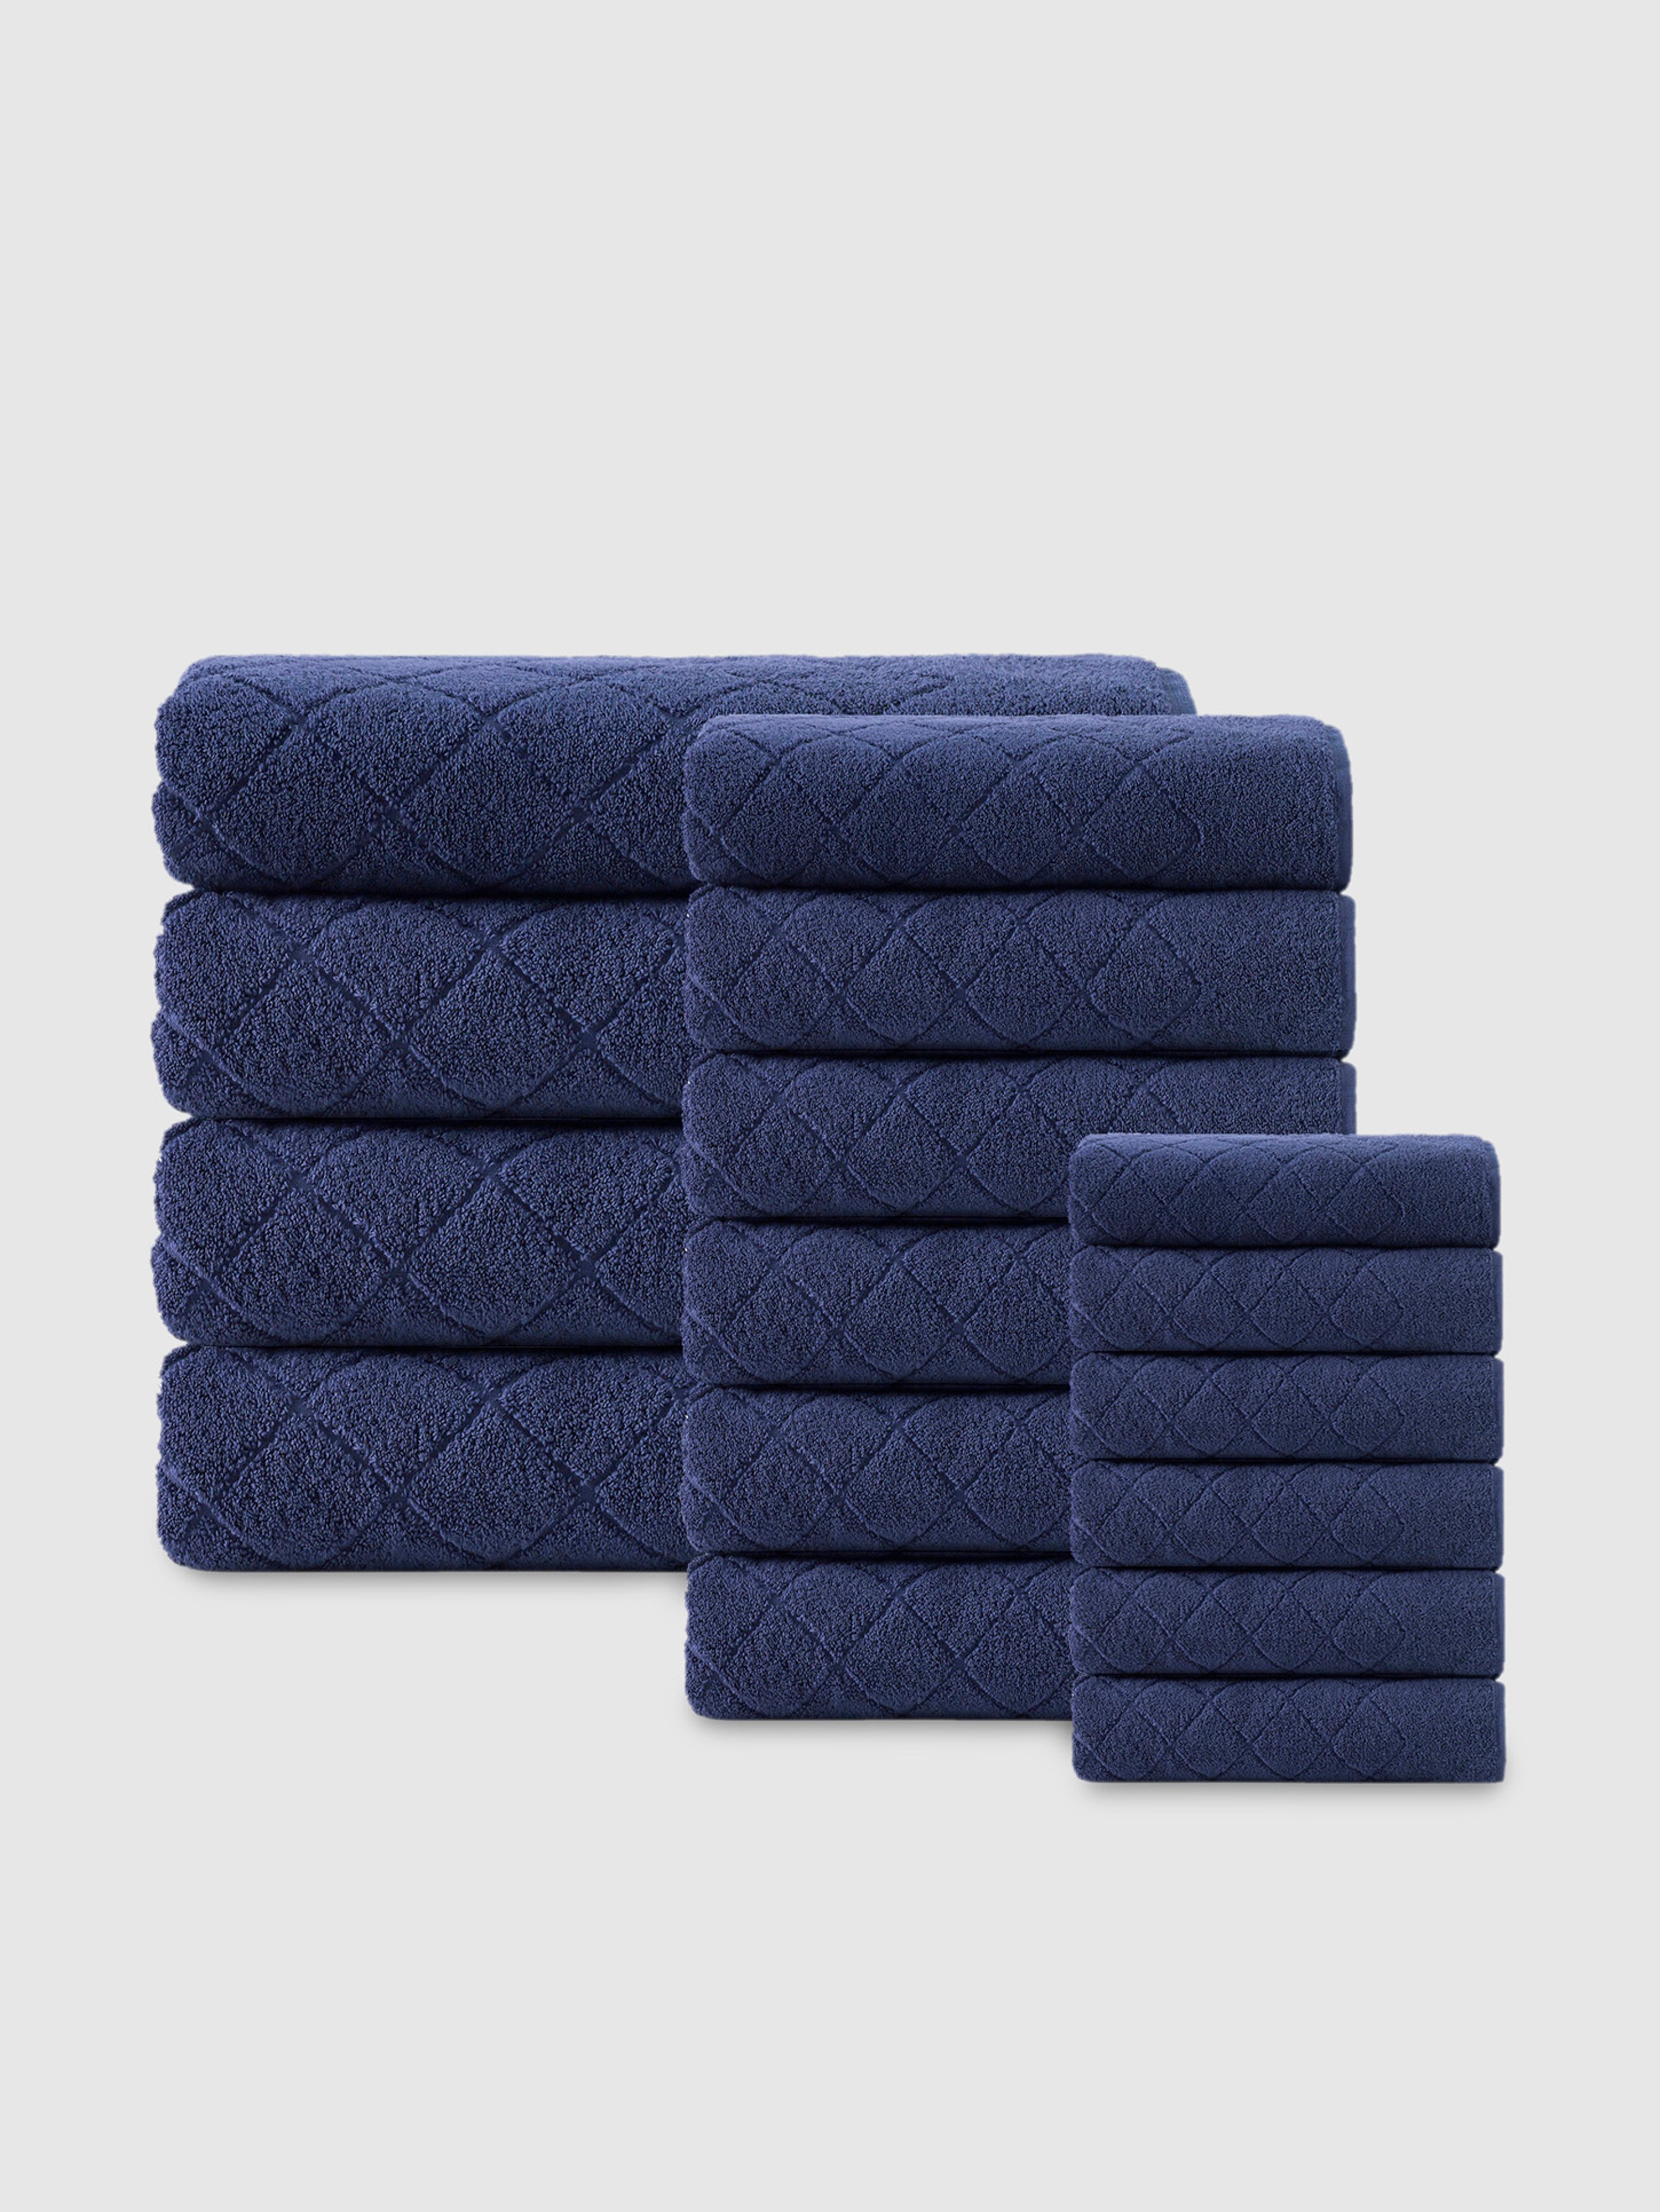 Enchante Home Gracious Turkish Cotton Towel Set Of 16 In Navy